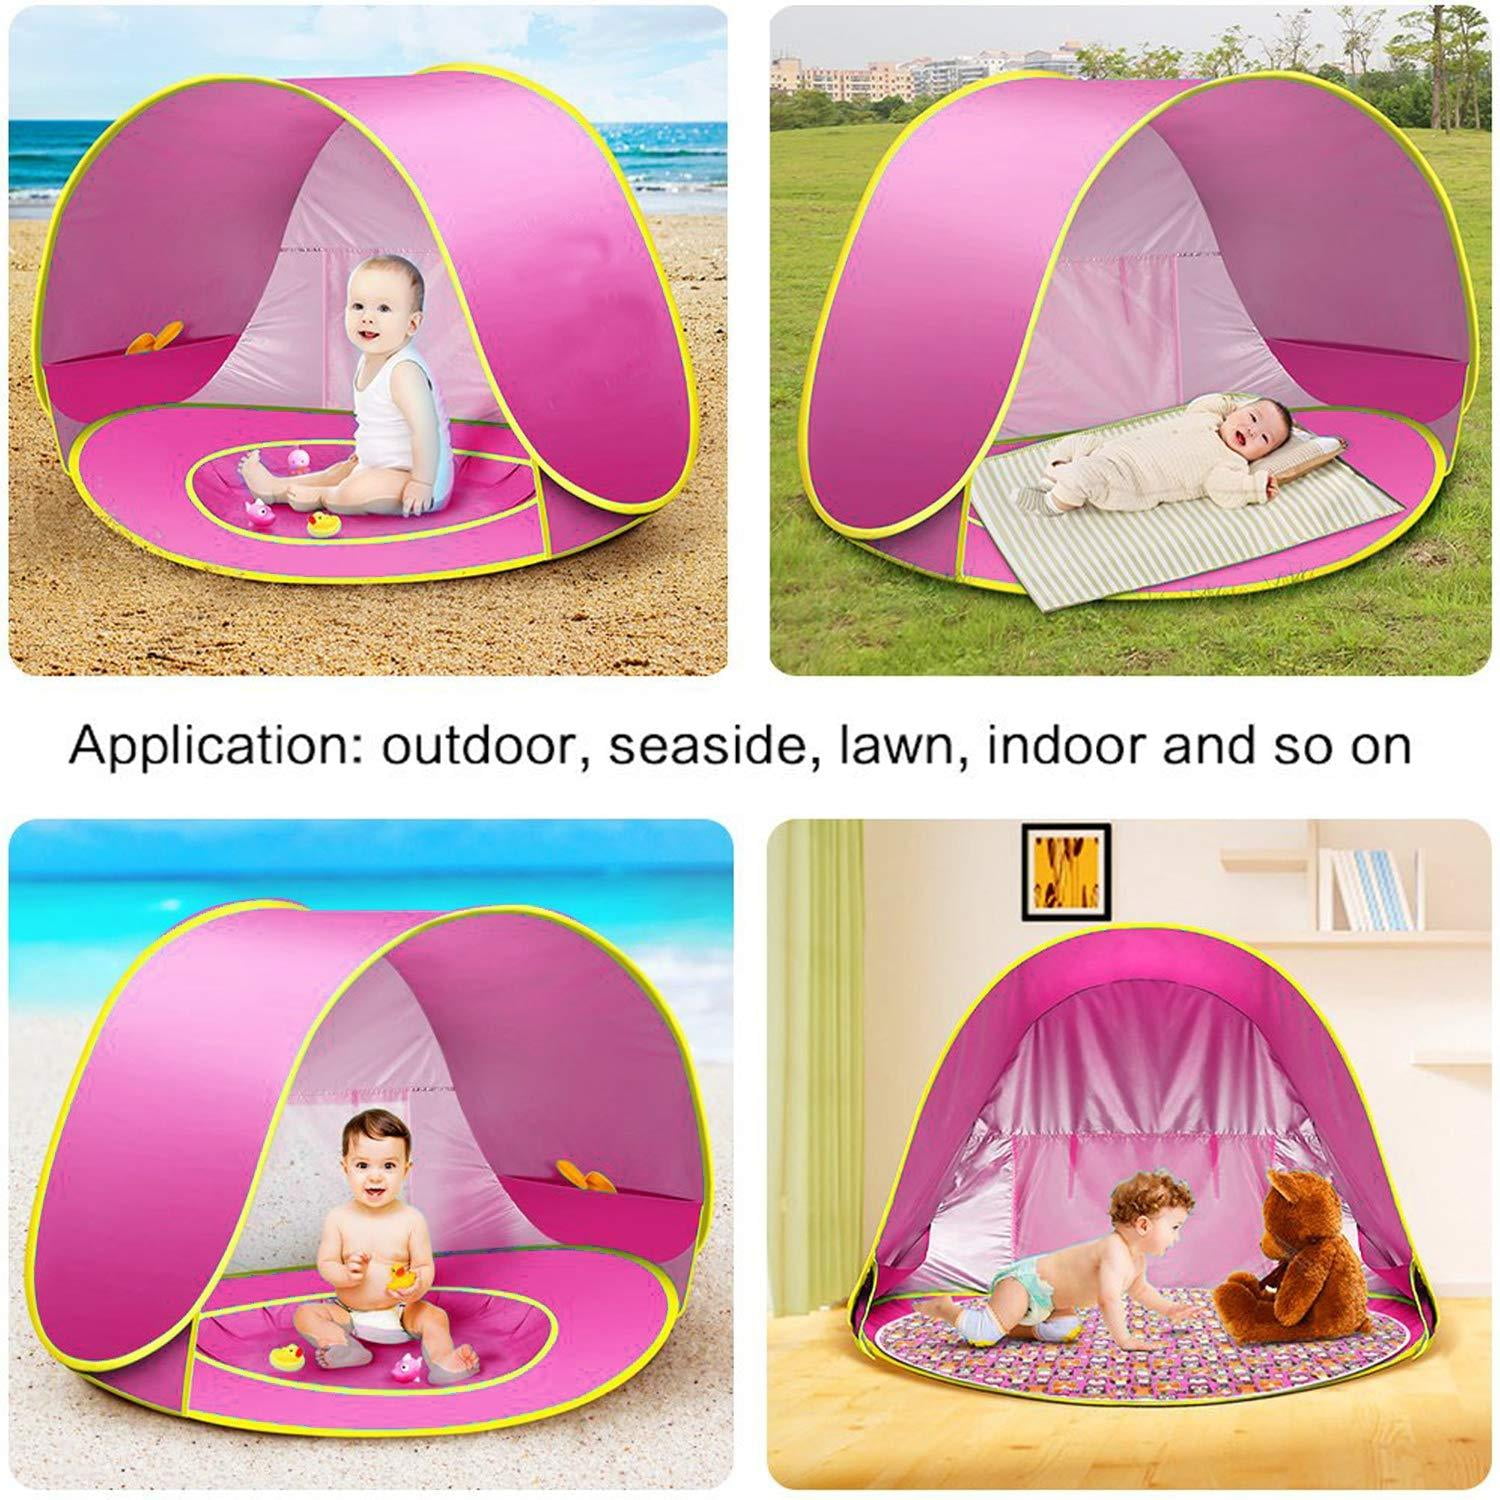 Baby Beach Tent 50+ UPF UV Protection & Waterproof 300MM Pop Up Portable Sun Shelter with Pool Summer Outdoor Baby Tent for Aged 0-4 Infant Toddler Kids Parks Beach Shade